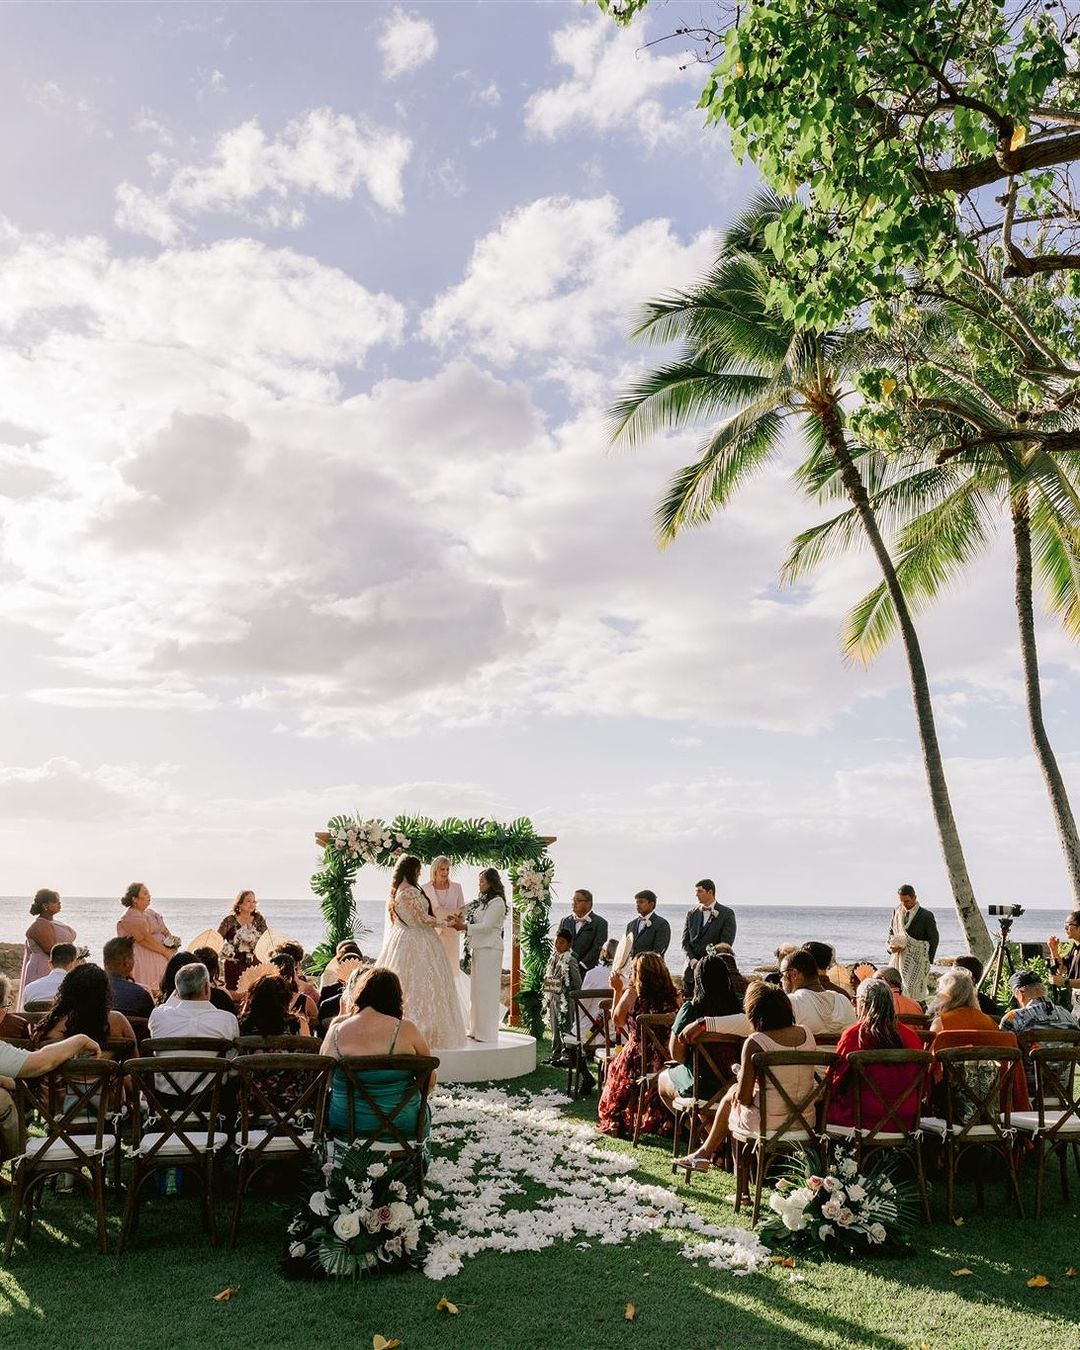 A tropical ceremony at the Disney Aulani Resort.